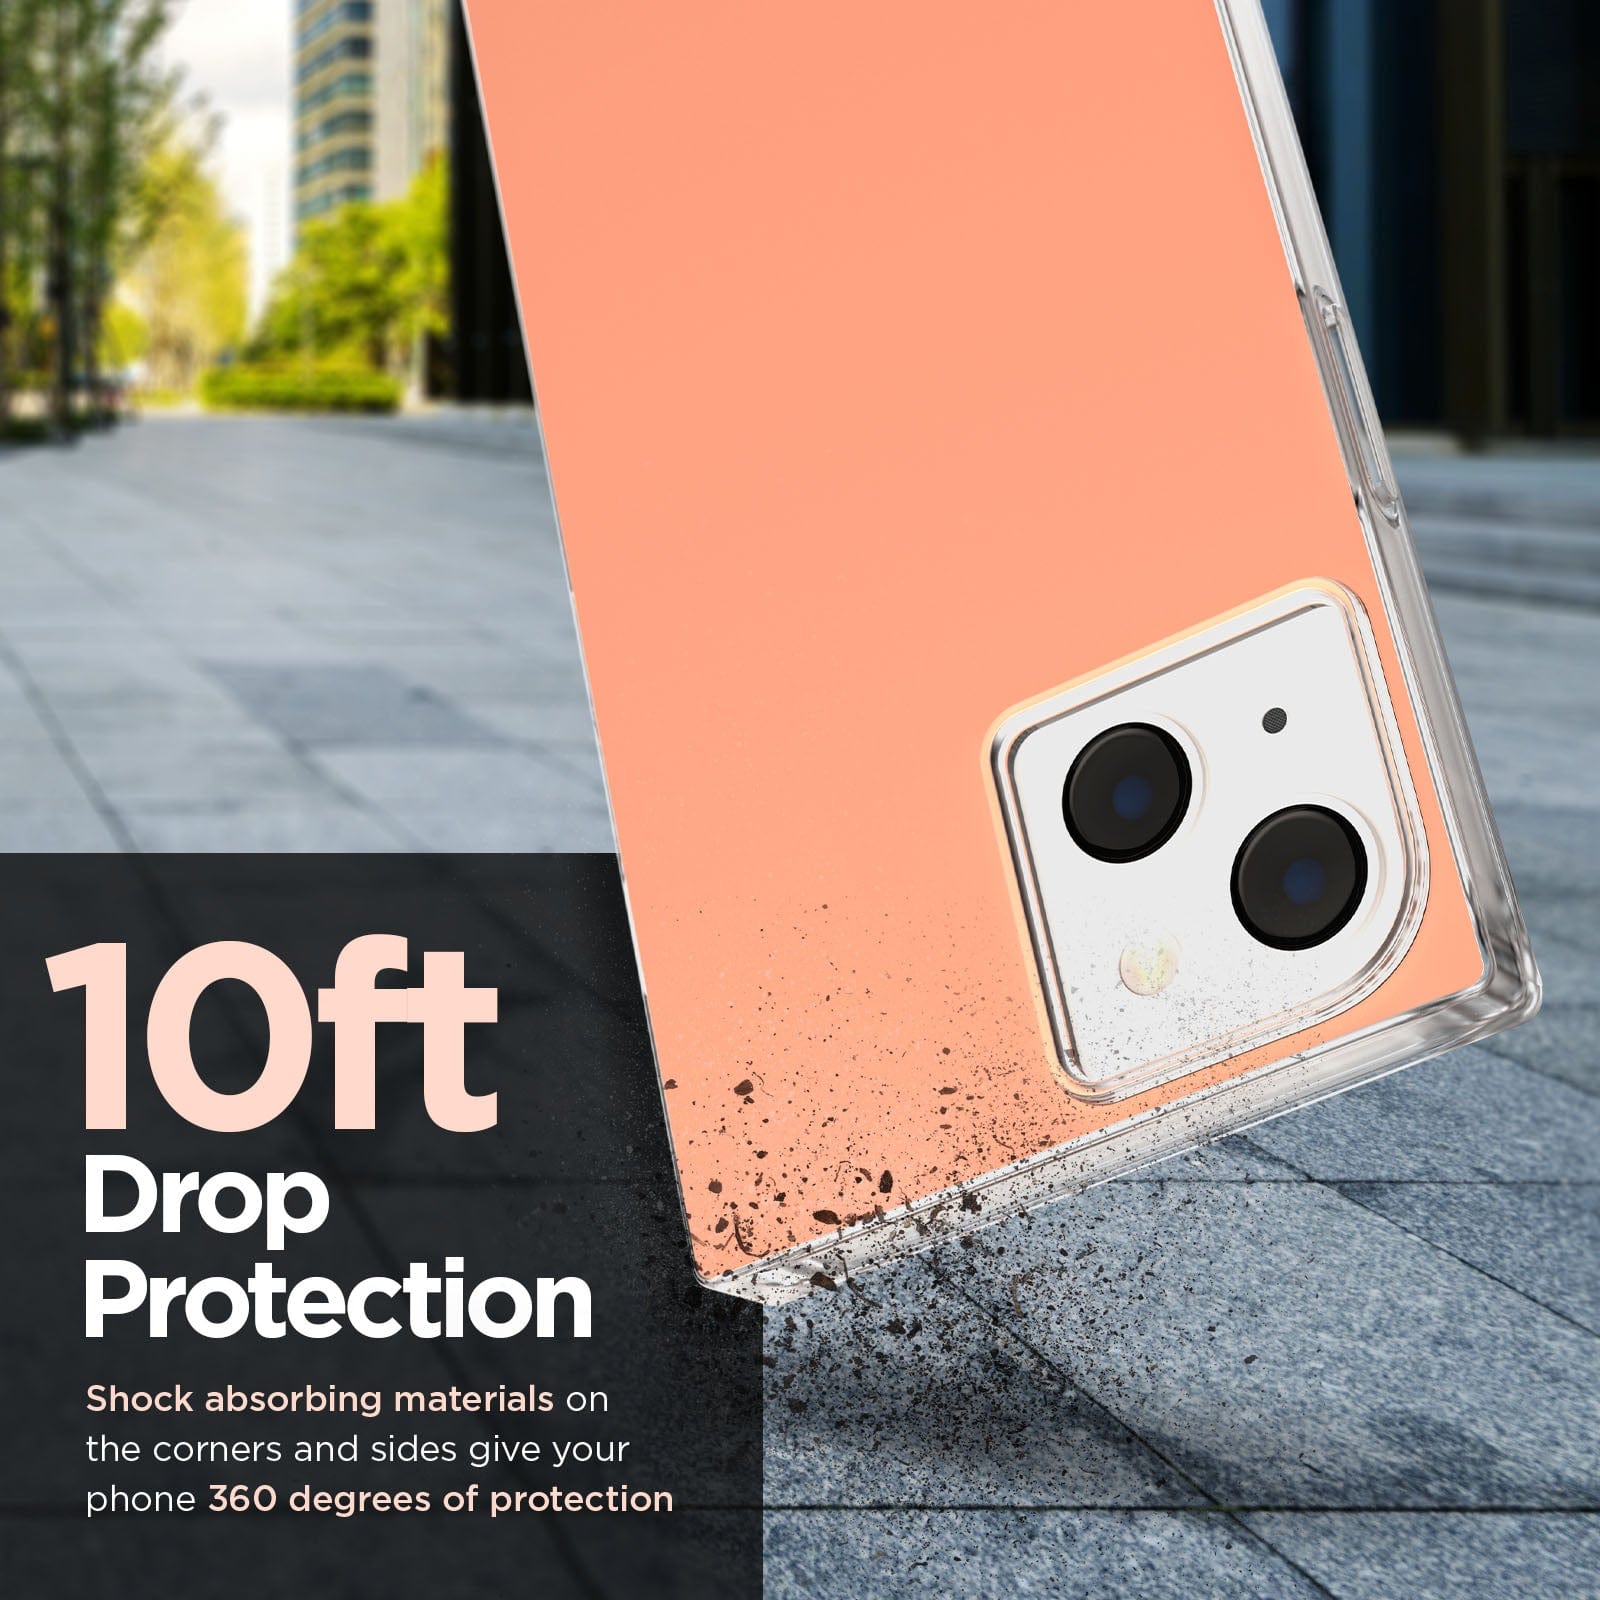 10ft Drop Protection. Shock absorbing materials on the corners and sides give your phone 360 degrees of protection. color::Clay Pink